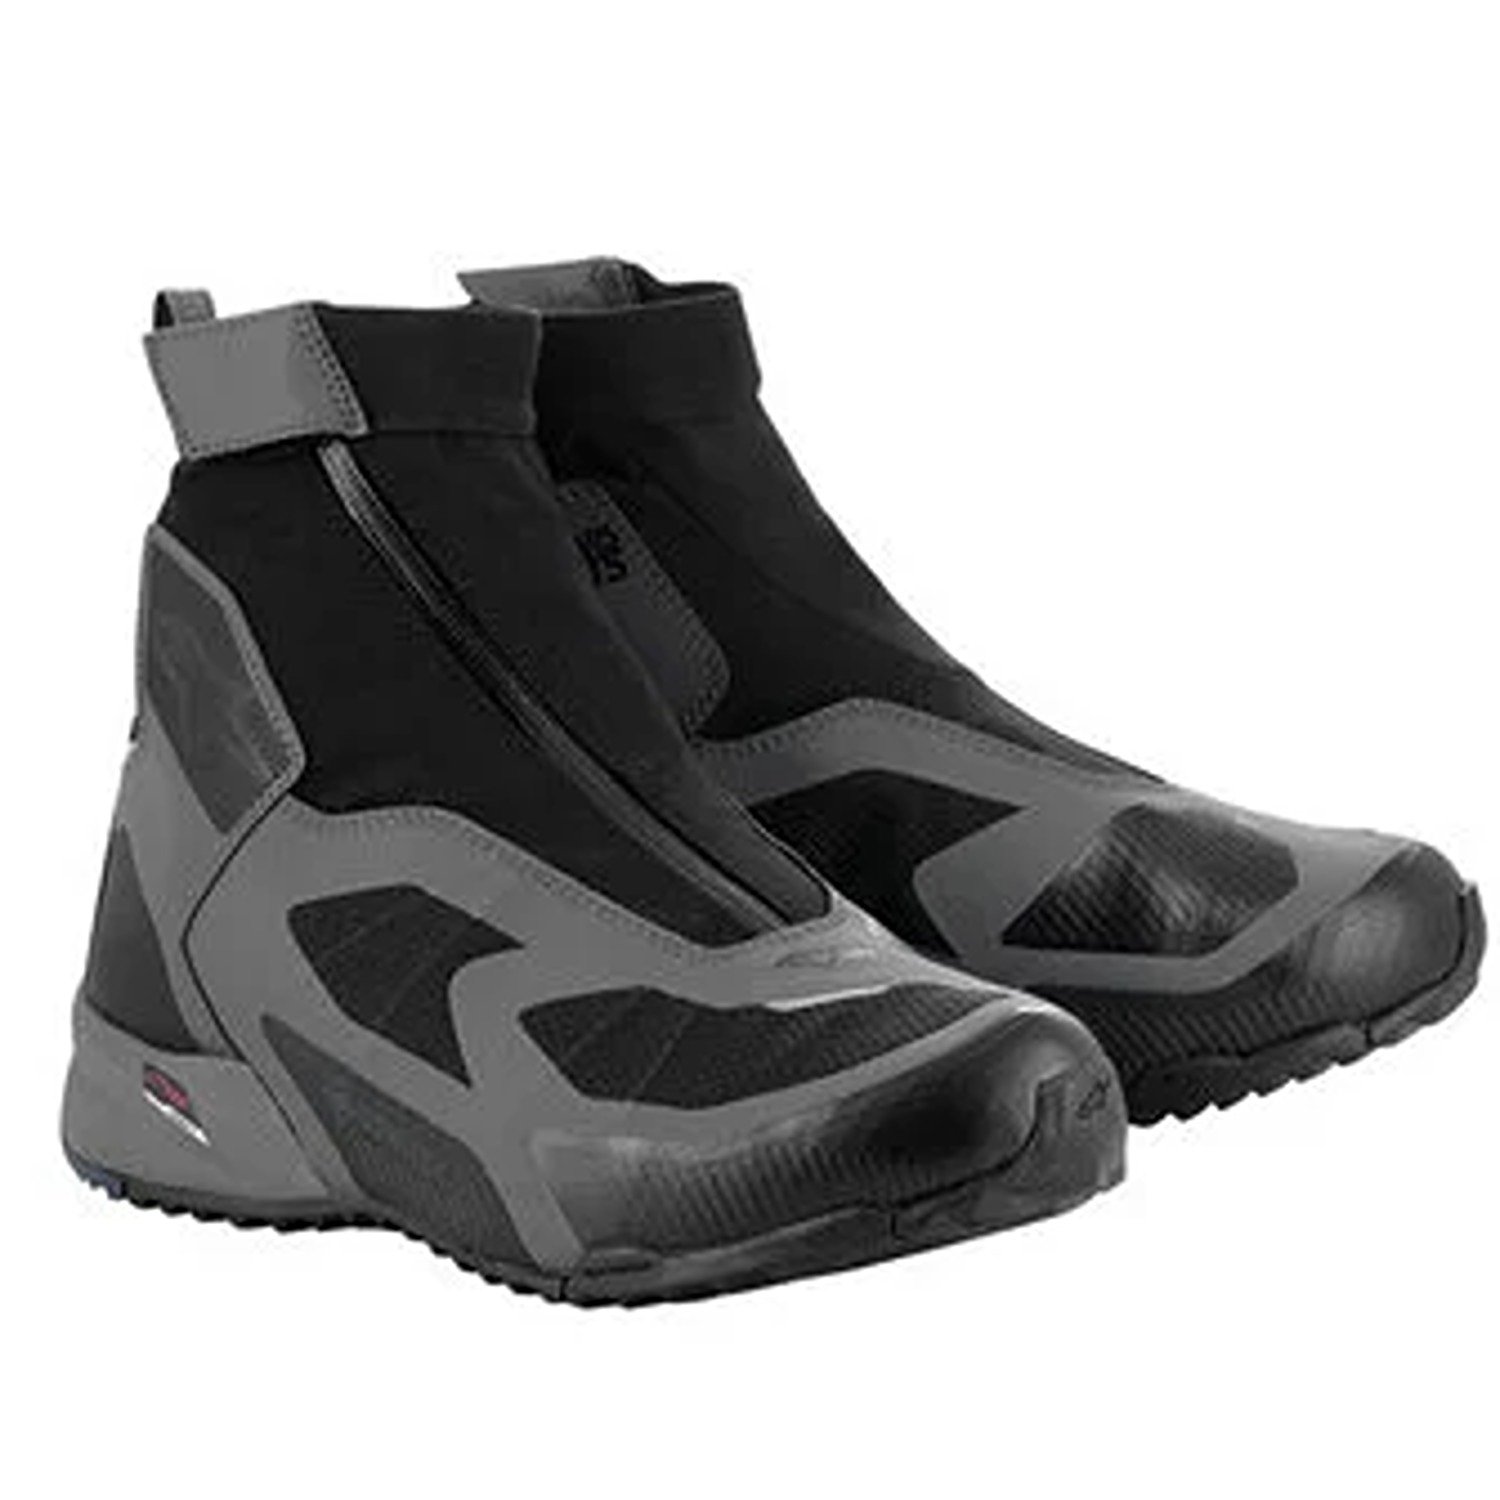 Image of Alpinestars CR-8 Gore-Tex Shoes Black Mid Gray Bright Red Size US 115 ID 8059347260228